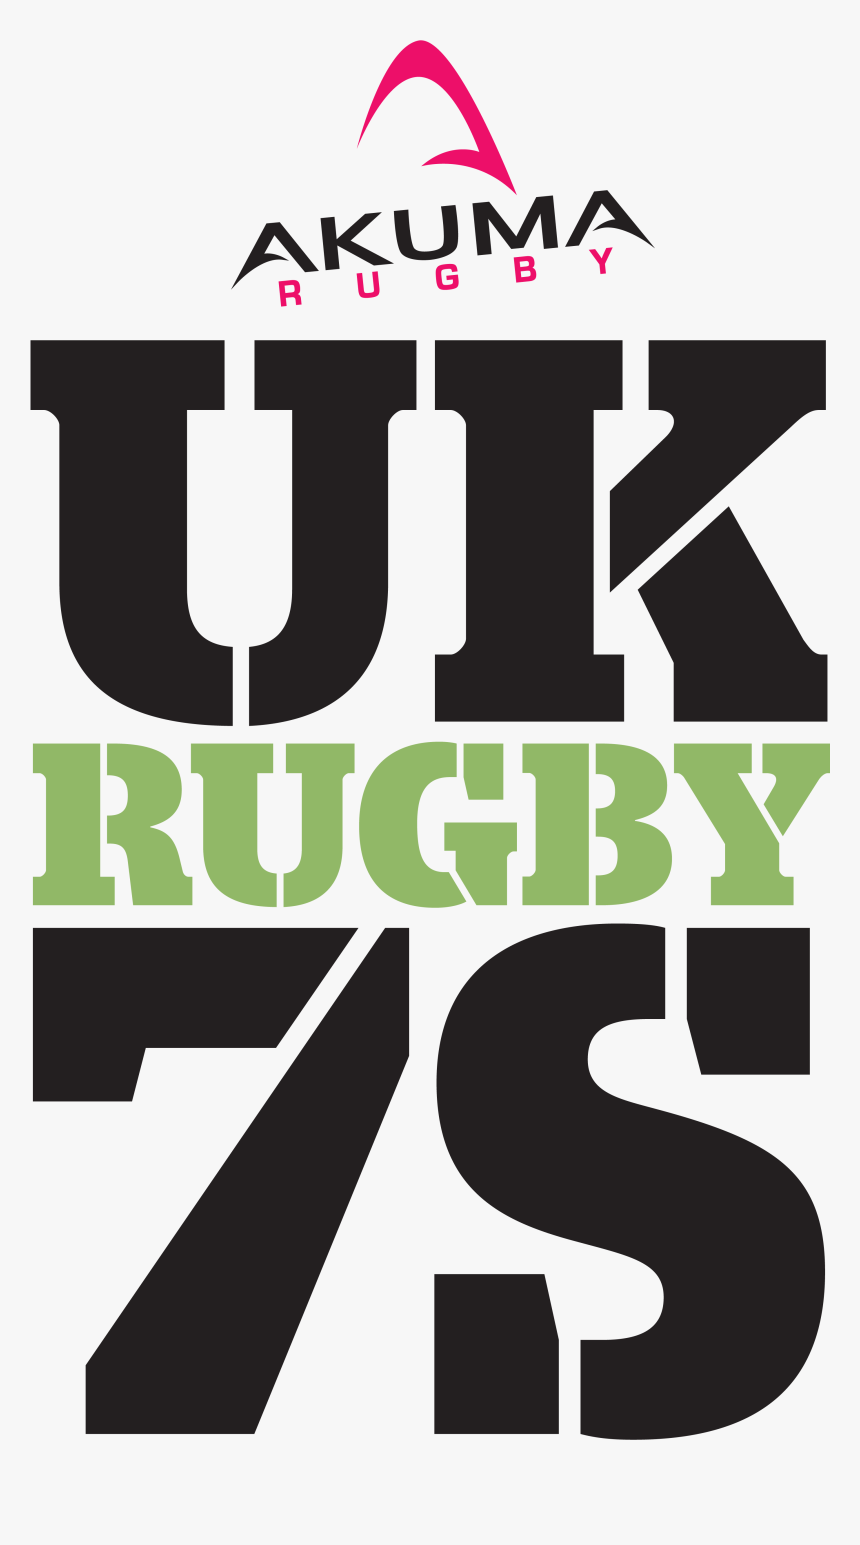 Akuma Rugby Are Delighted To Announce Their Continued, HD Png Download, Free Download